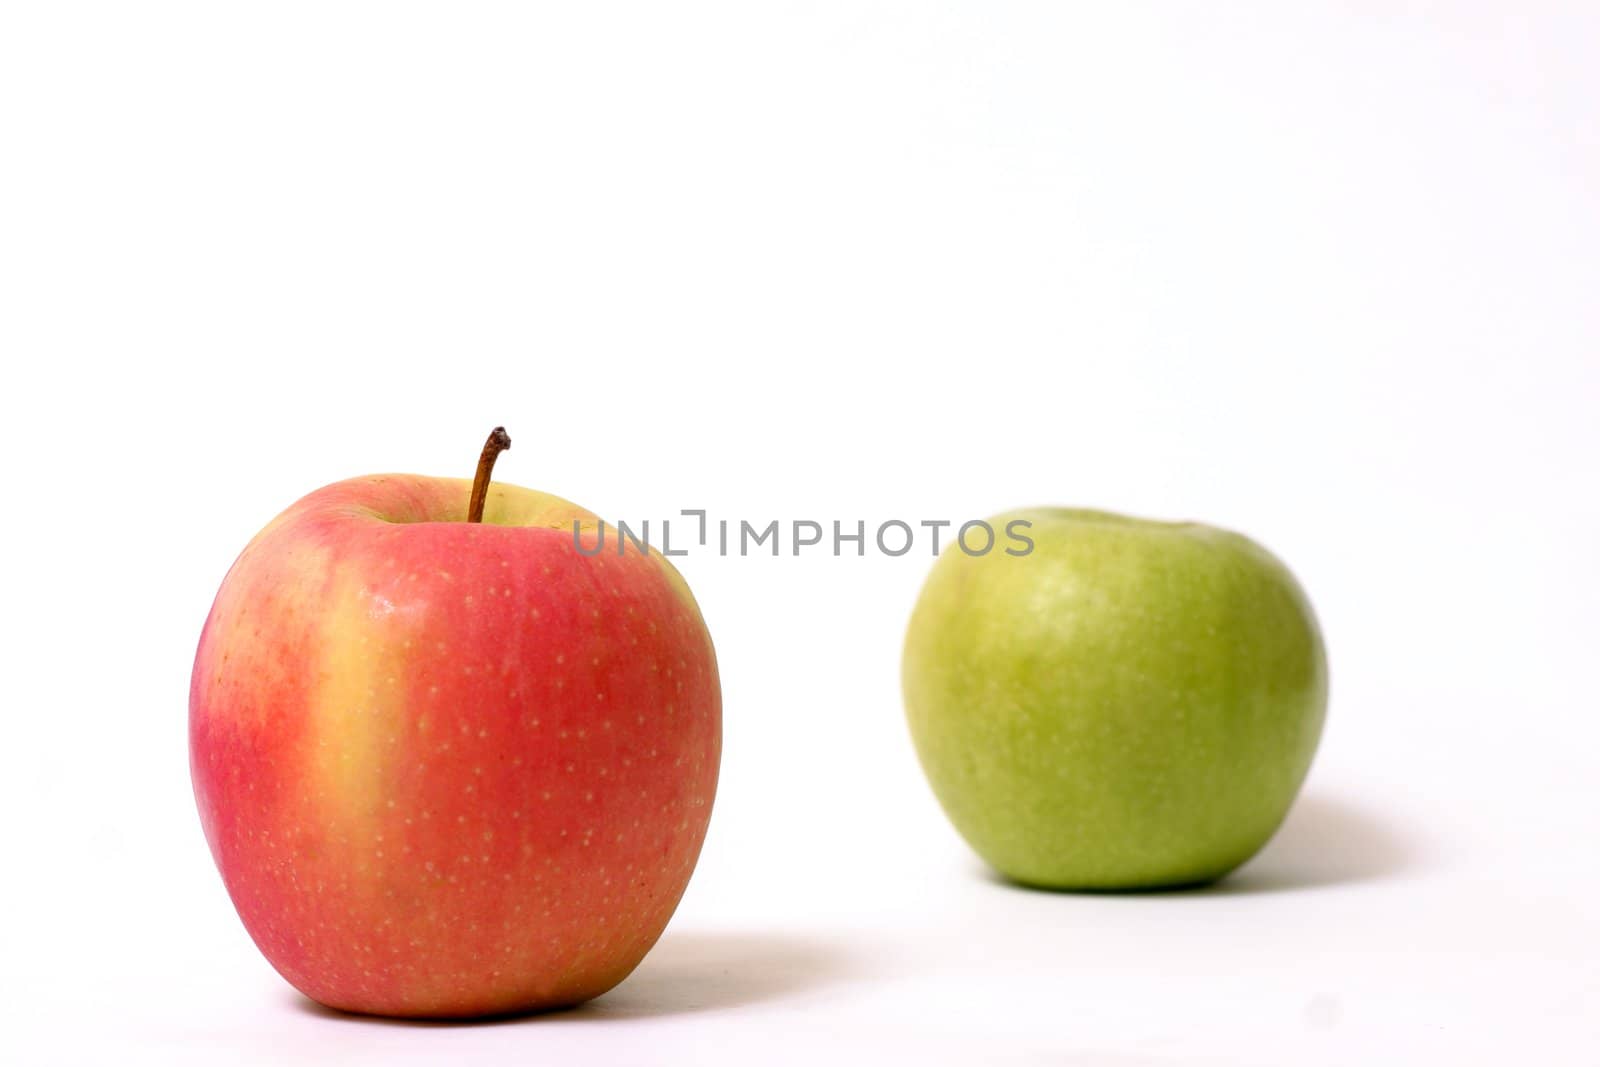 Red and green apple.  Focus is on the red apple